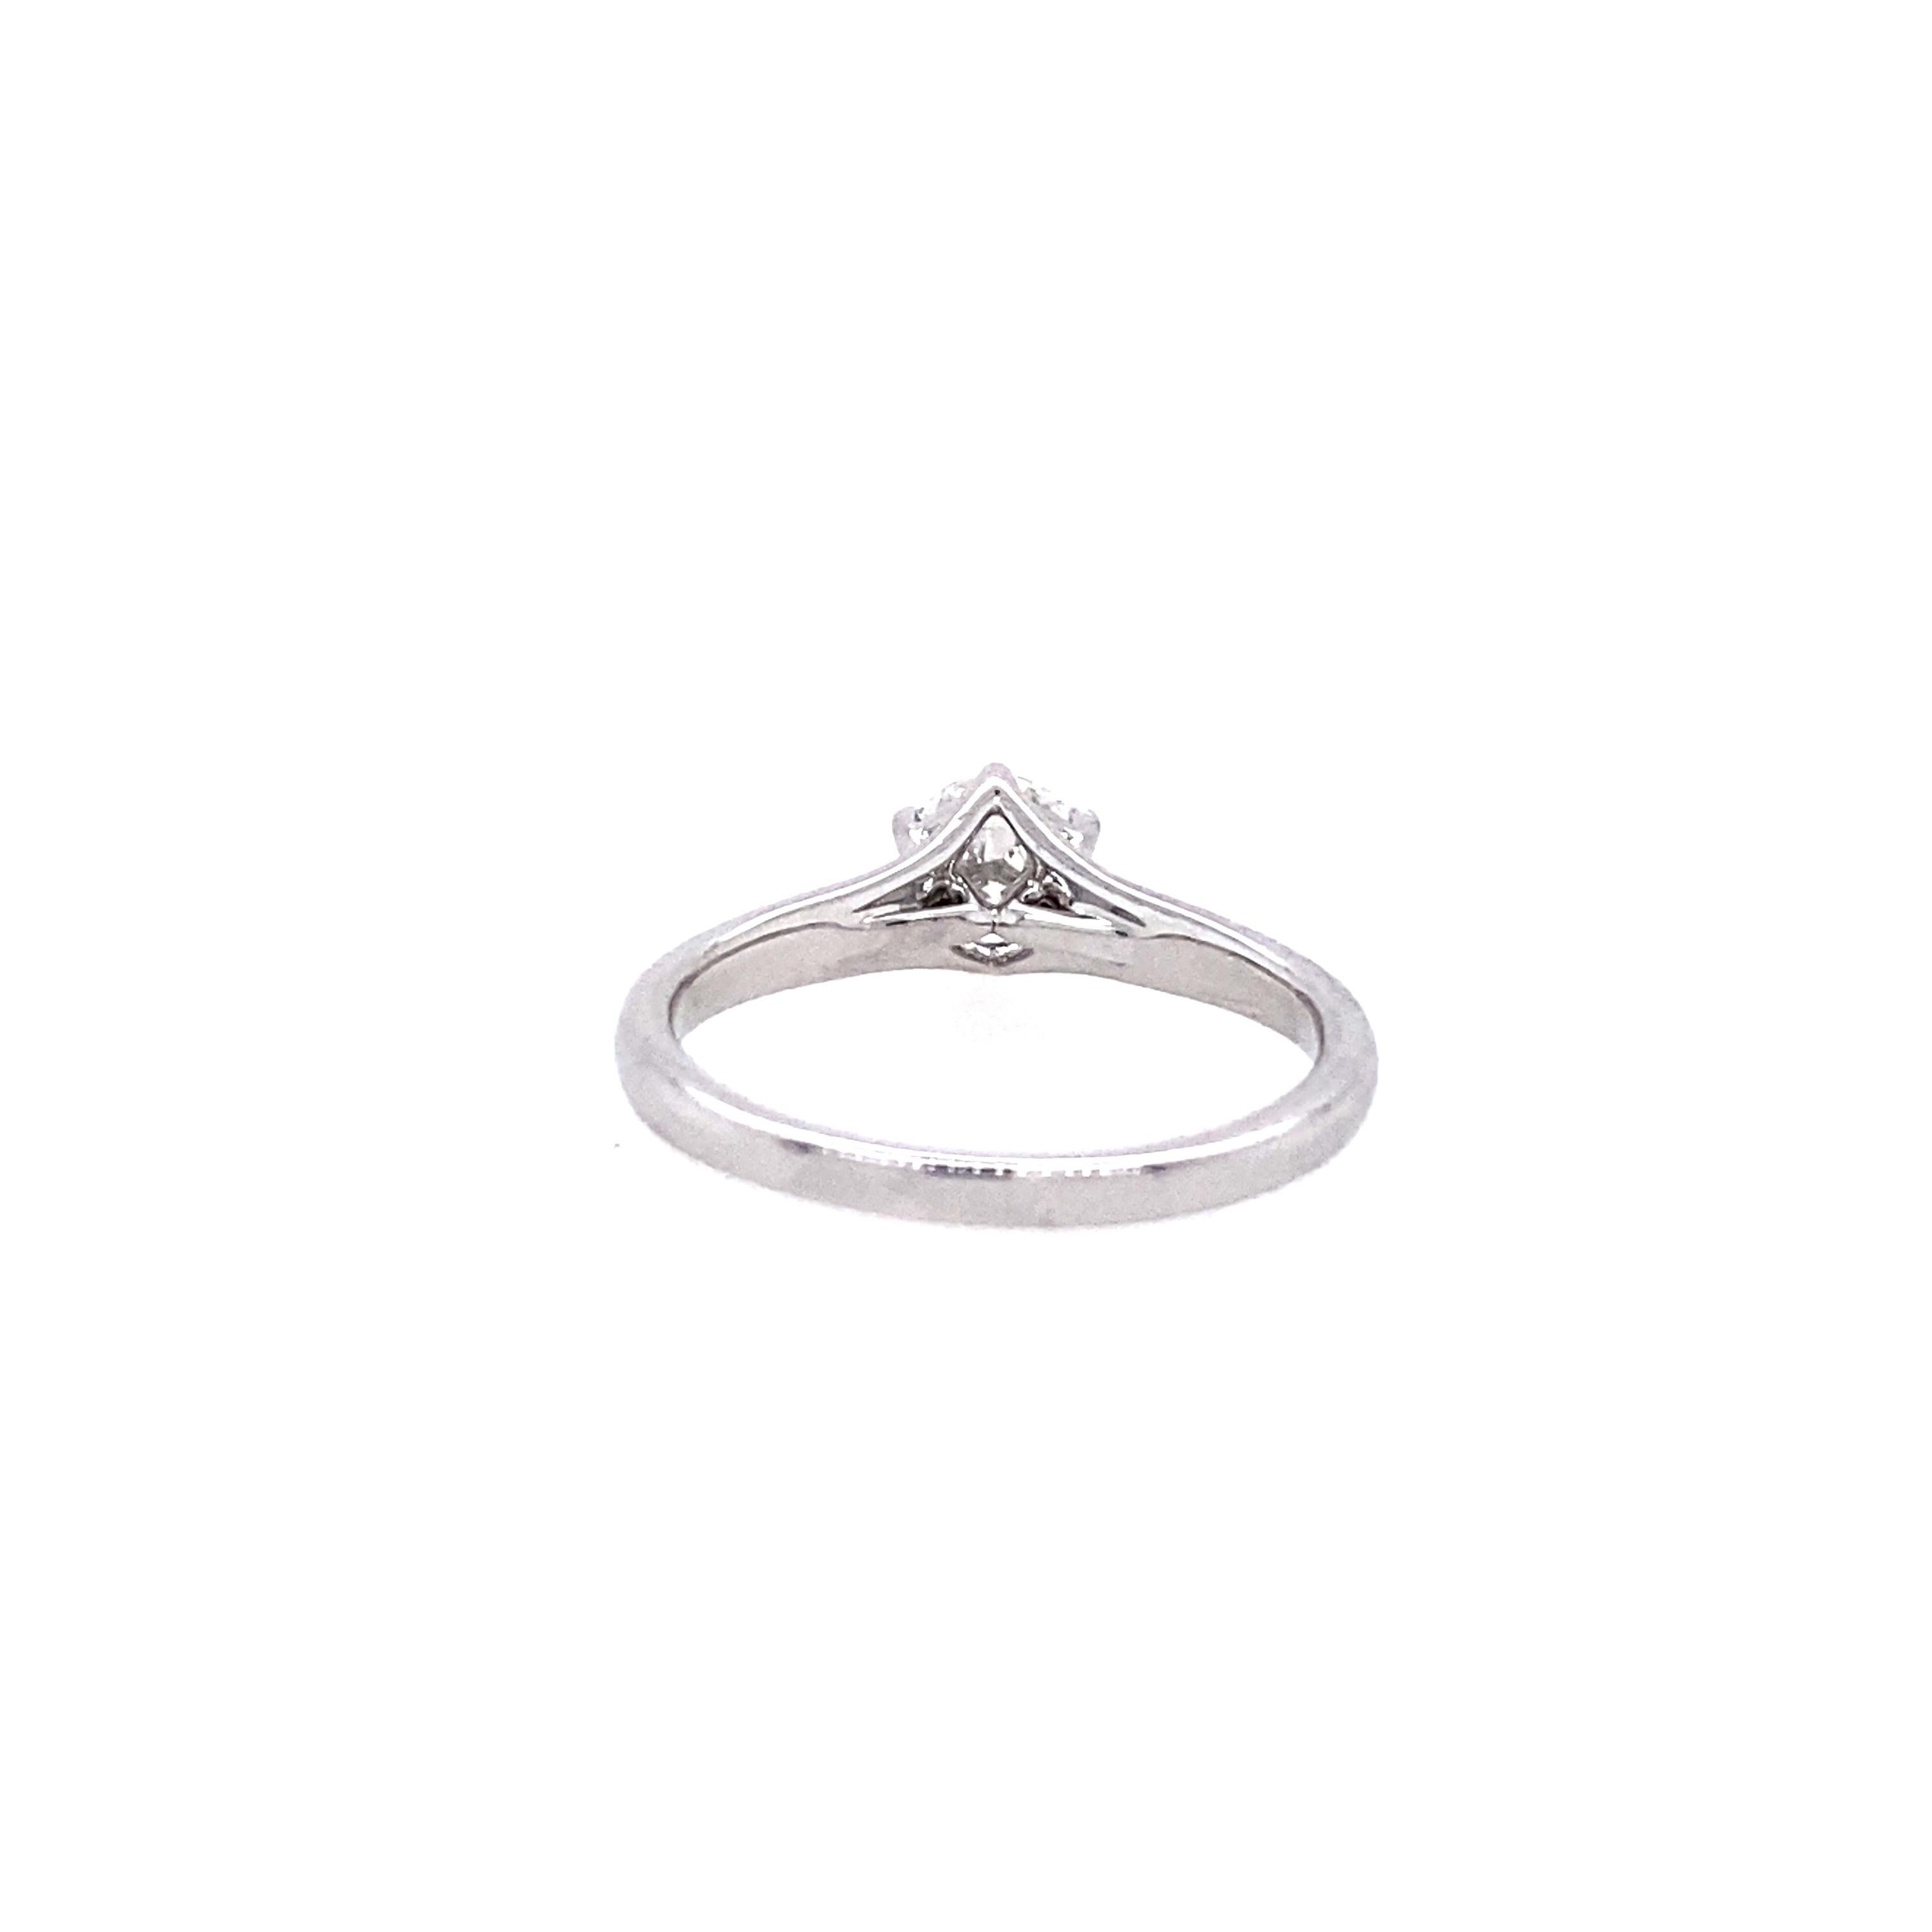 Contemporary Solitaire Diamond Engagement Ring in 14 Karat White Gold